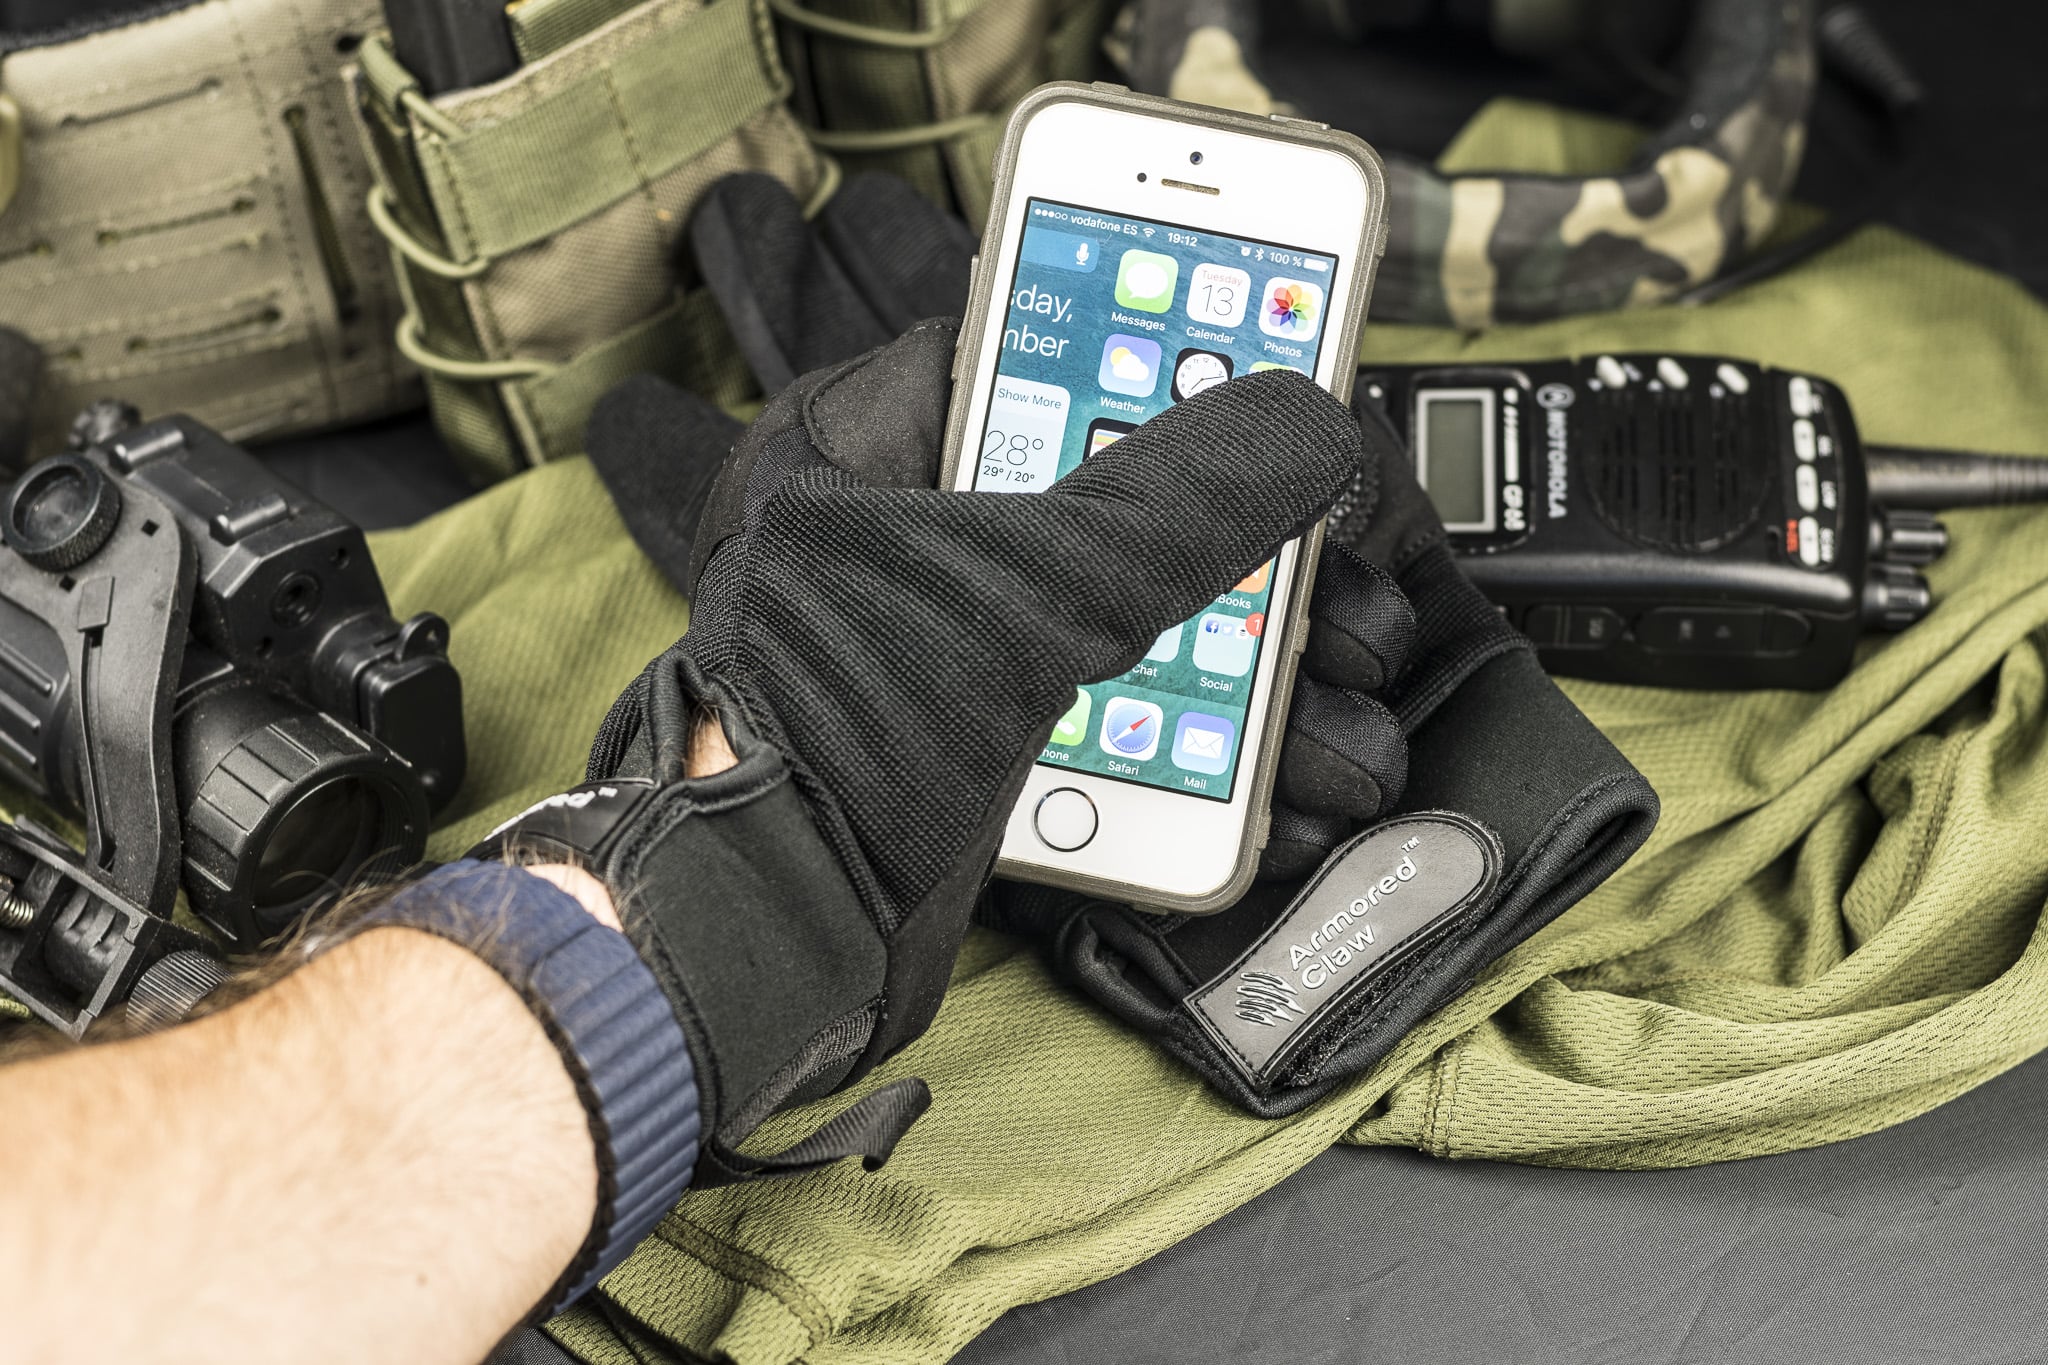 Armored Claw Shield gloves with a smartphone